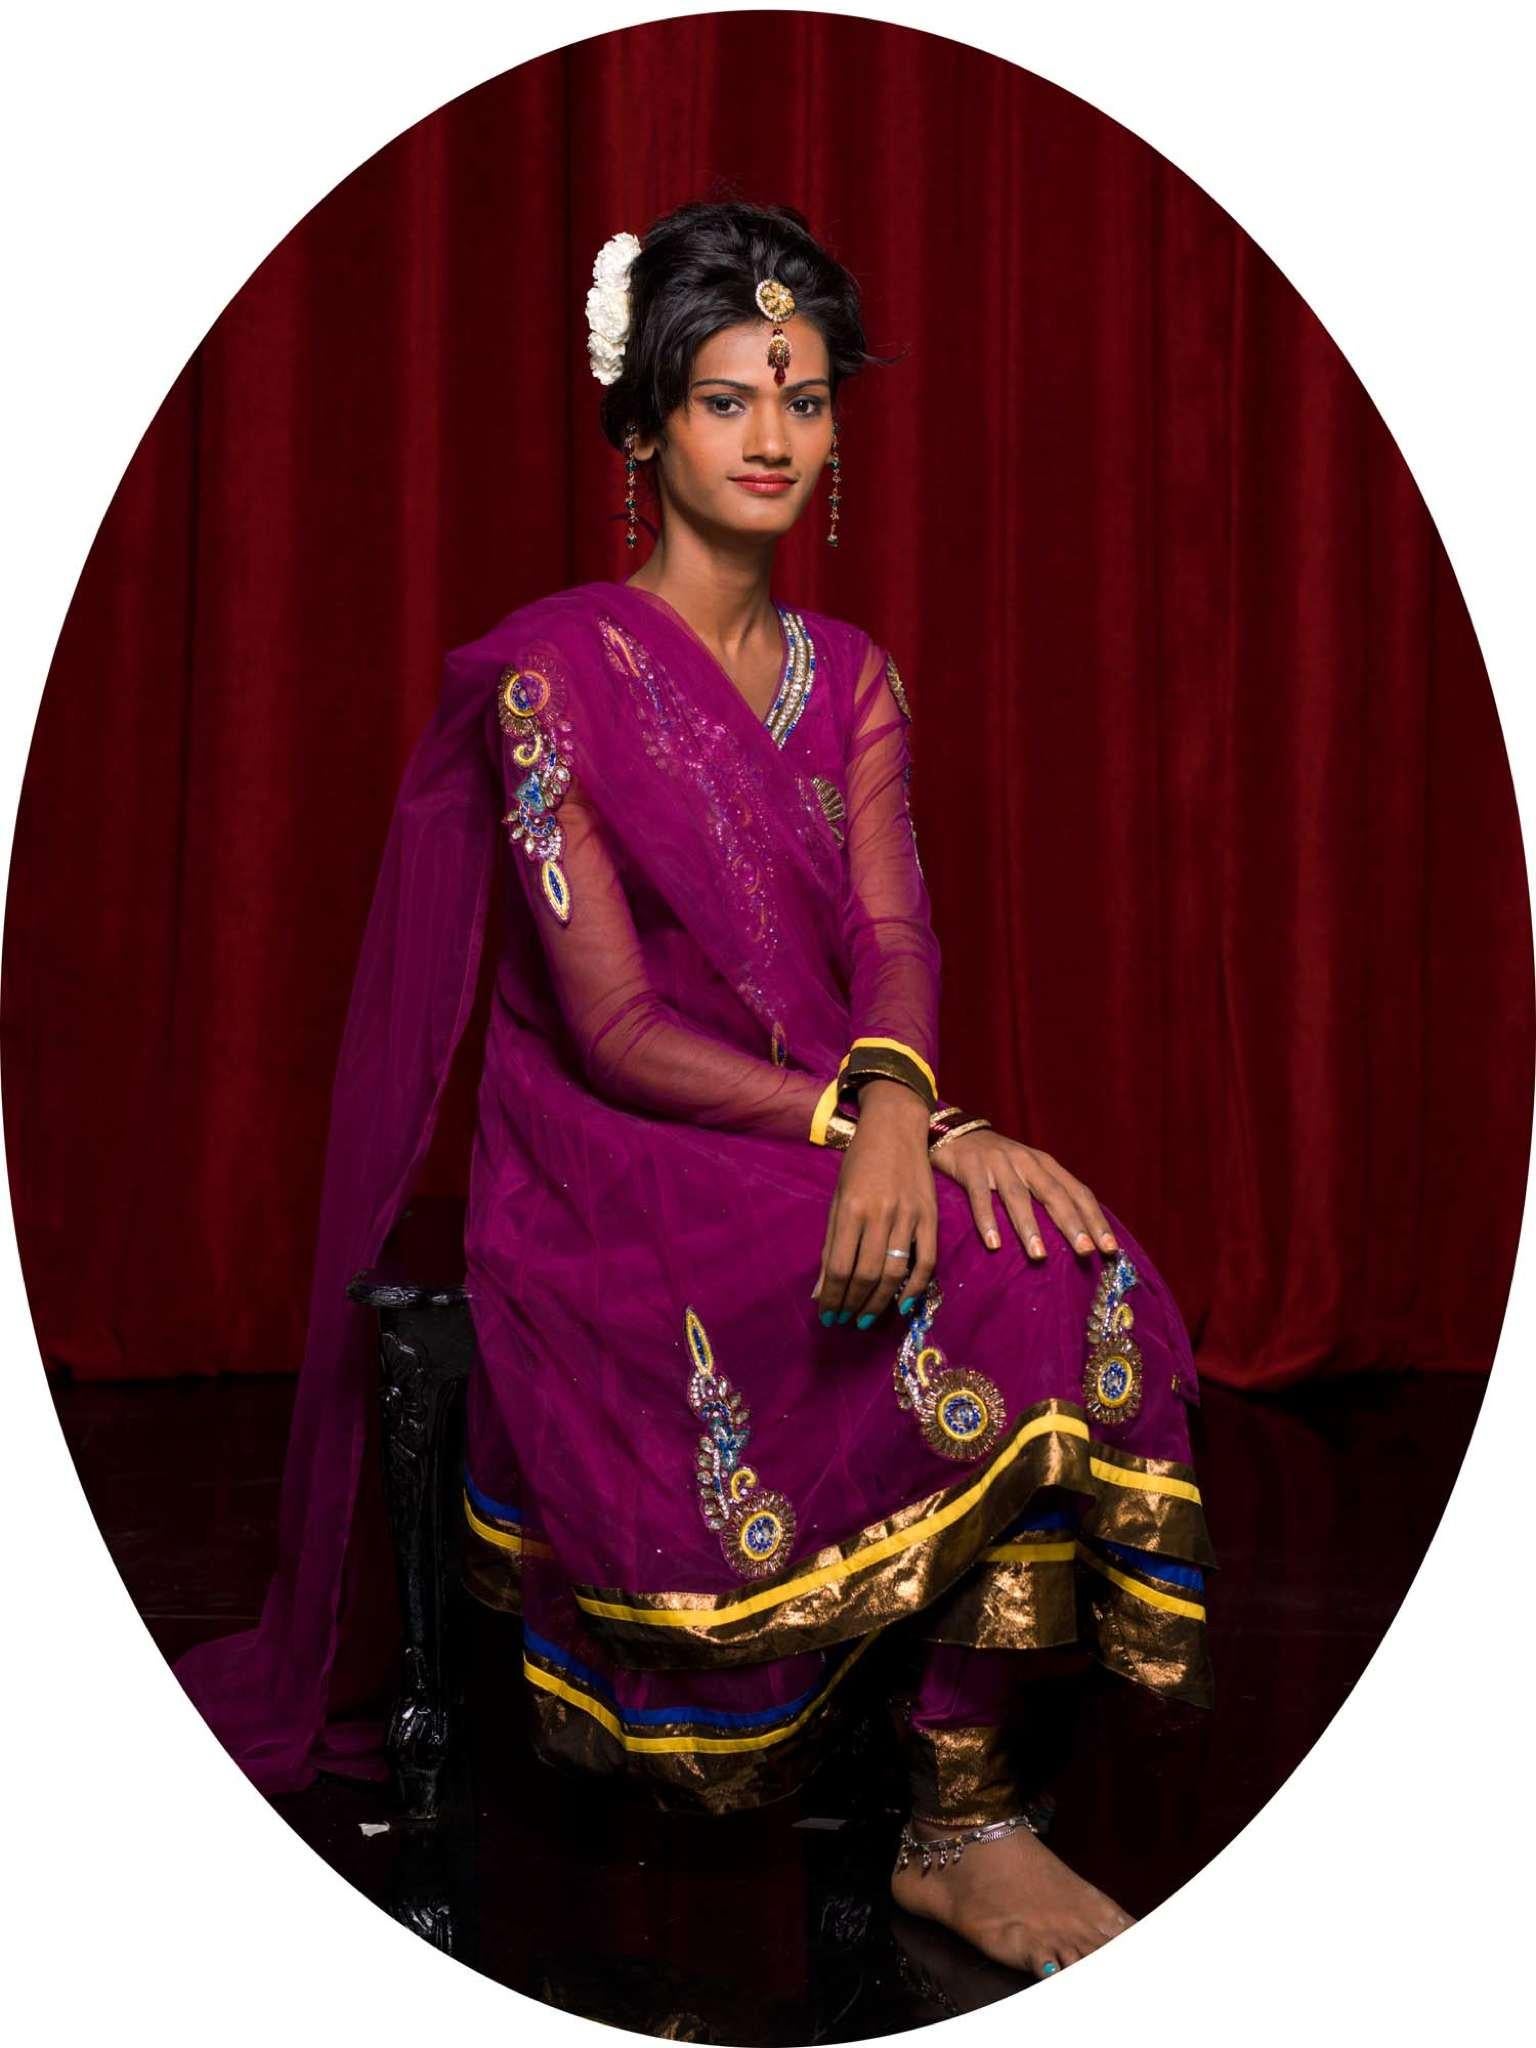 Sreesha, Protrait. From The Series The Third Gender of India